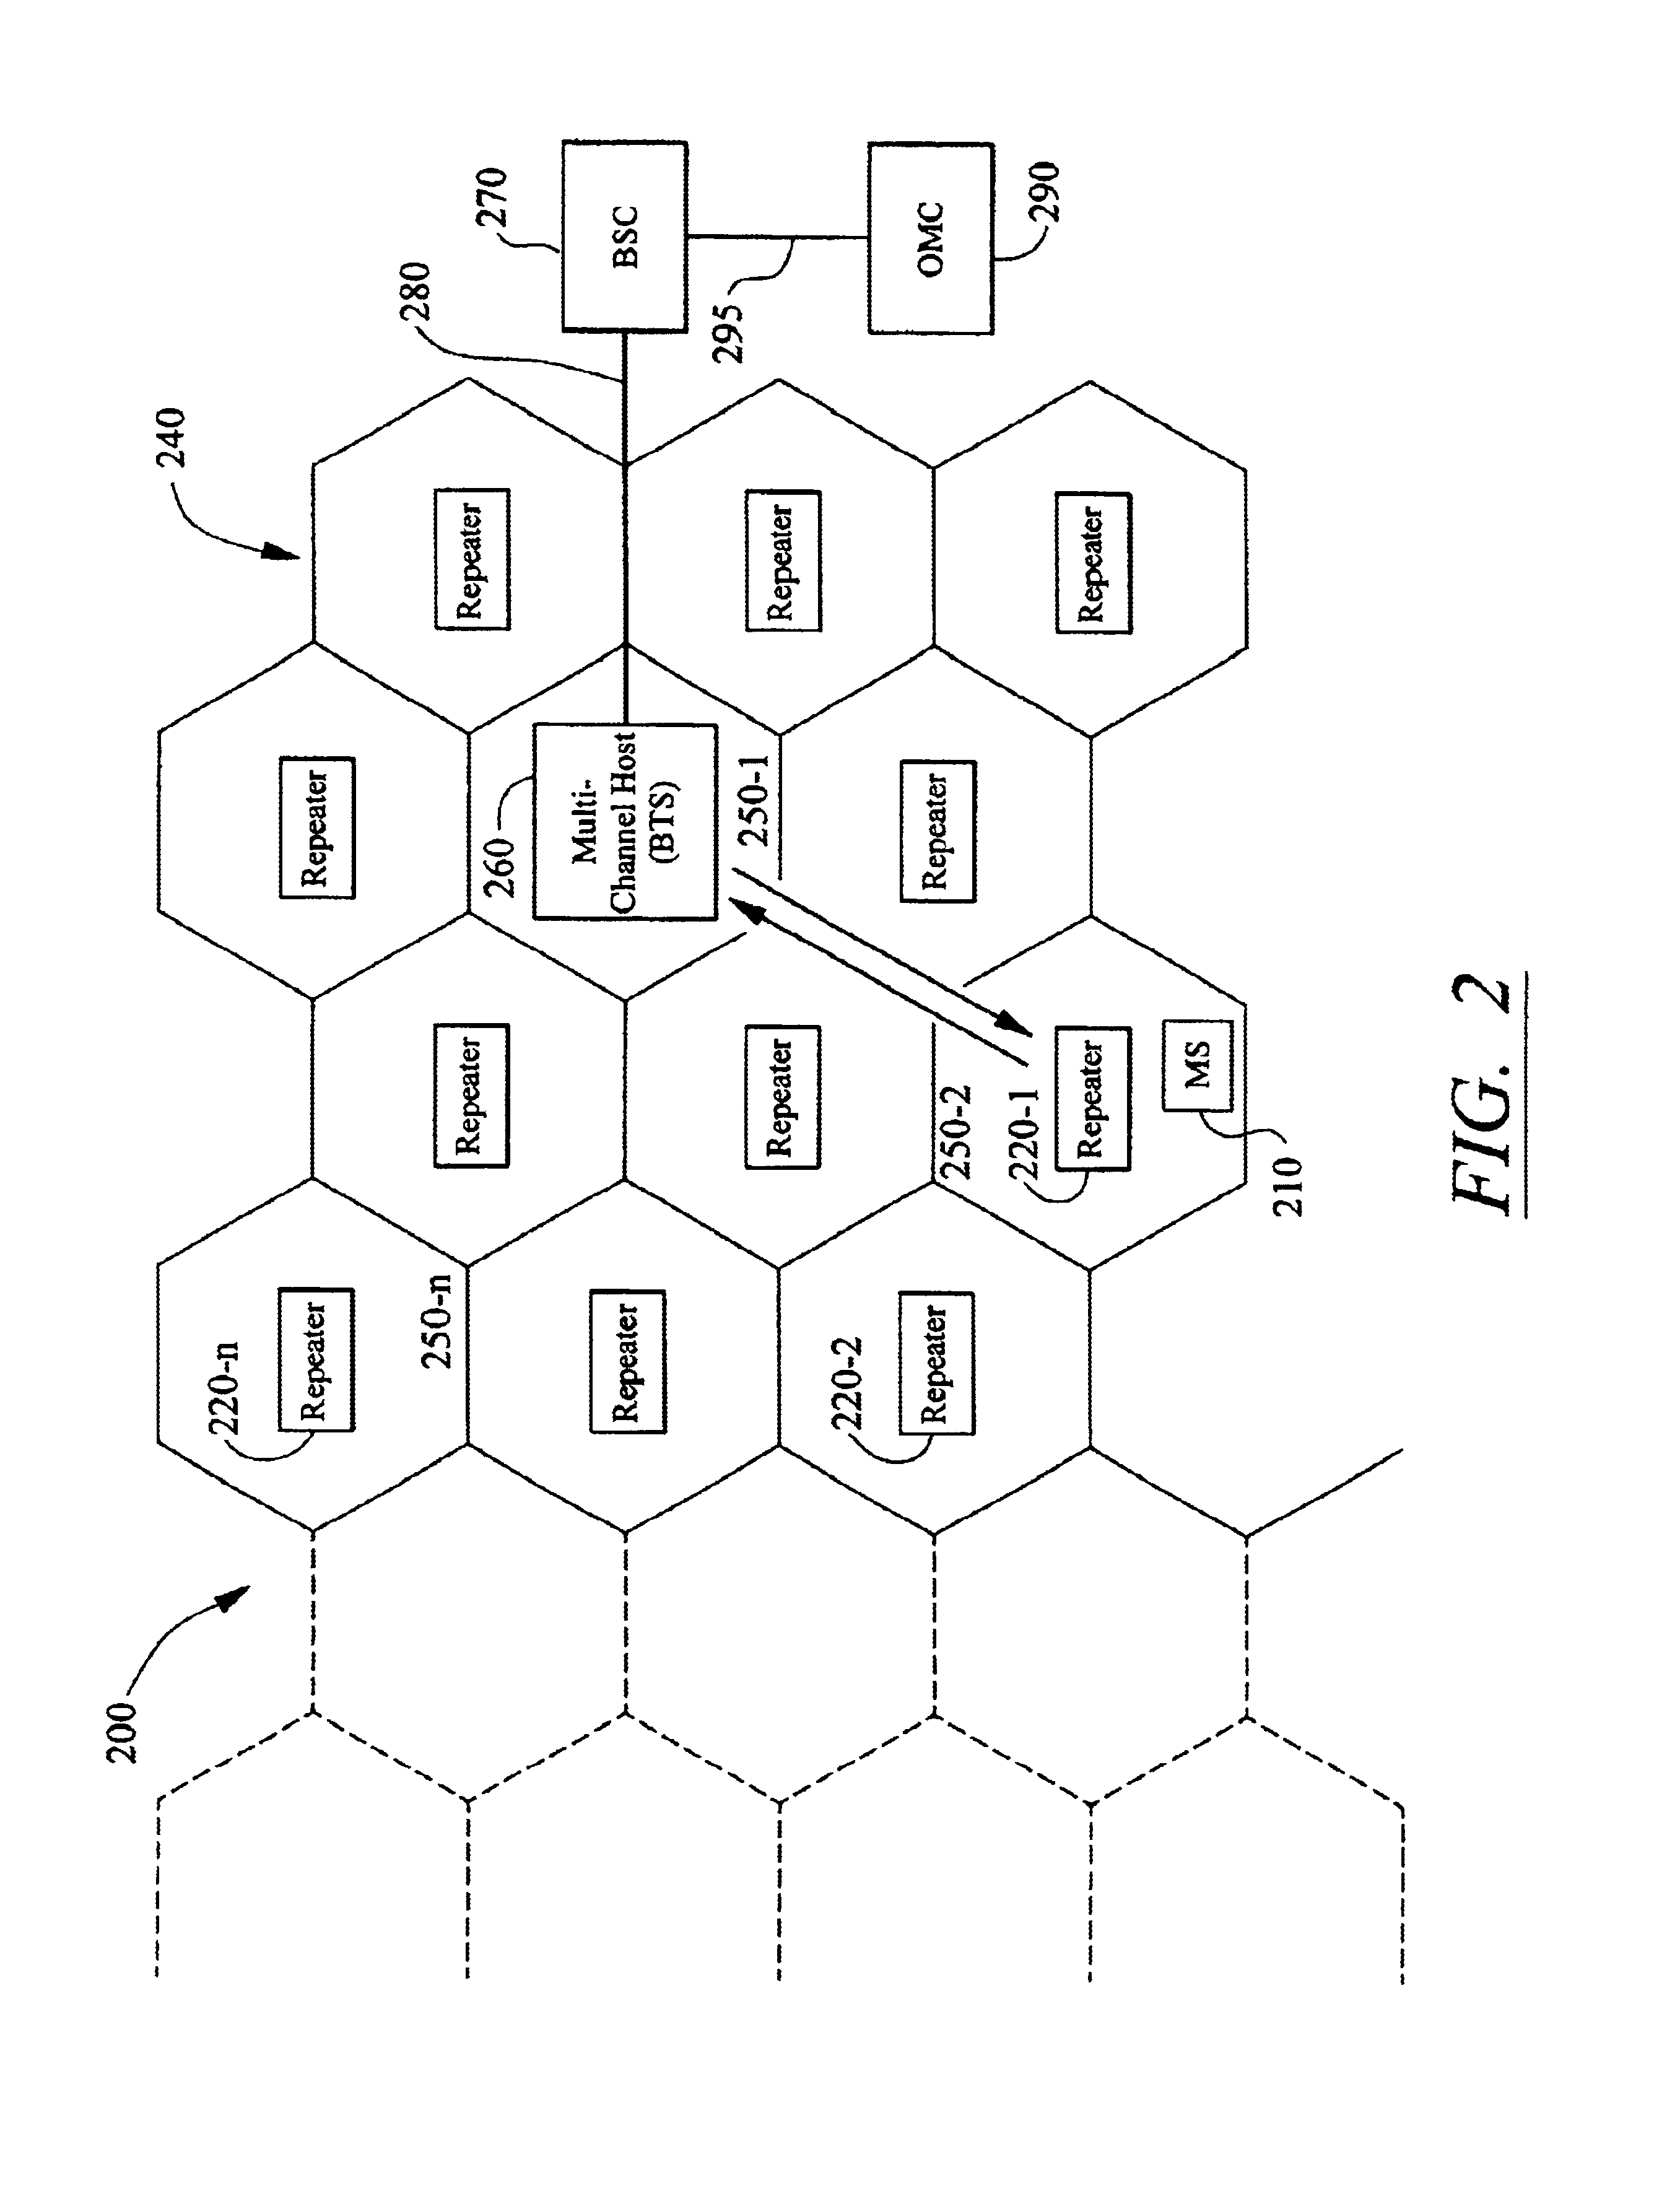 Method and apparatus employing wireless in-band signaling for downlink transmission of commands and uplink transmission of status for a wireless system repeater